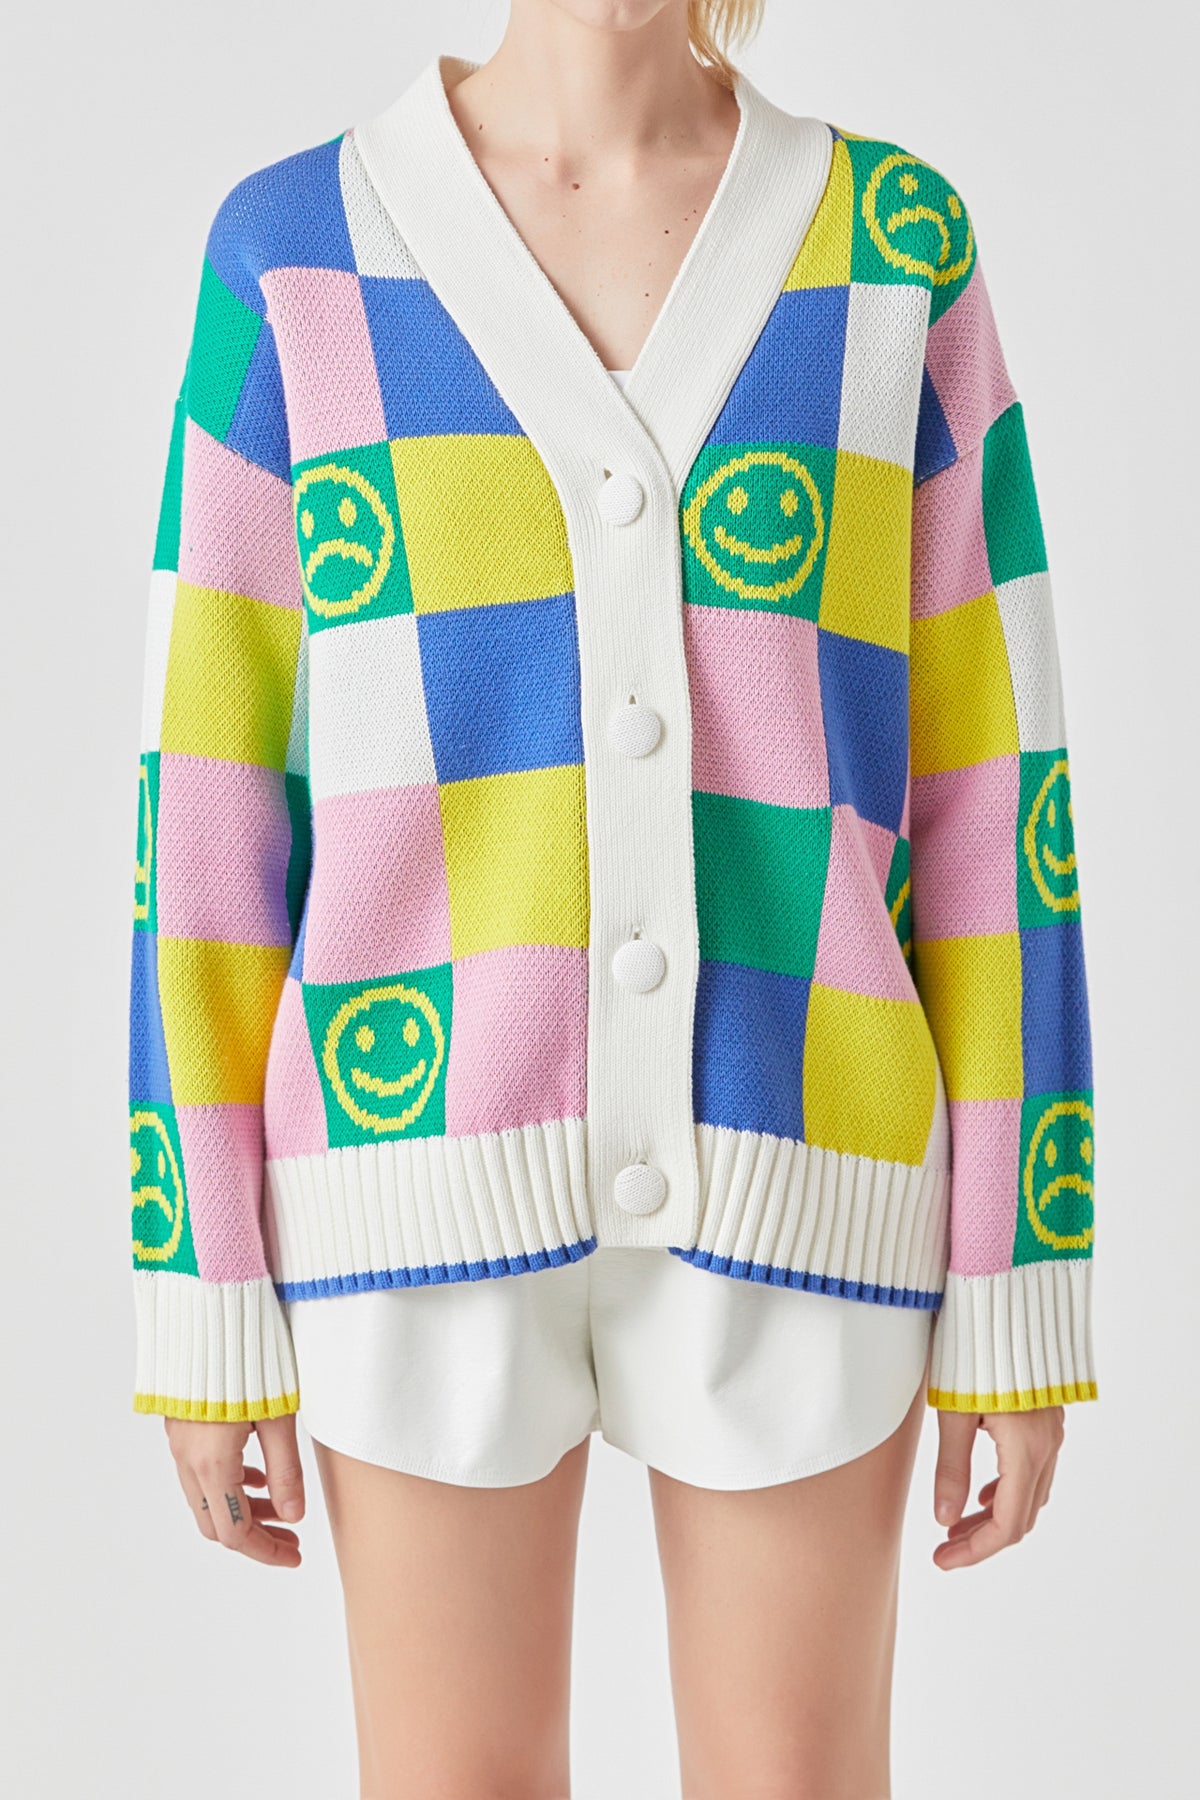 GREY LAB - Smiley Colorblock Knit Cardigan - CARDIGANS available at Objectrare